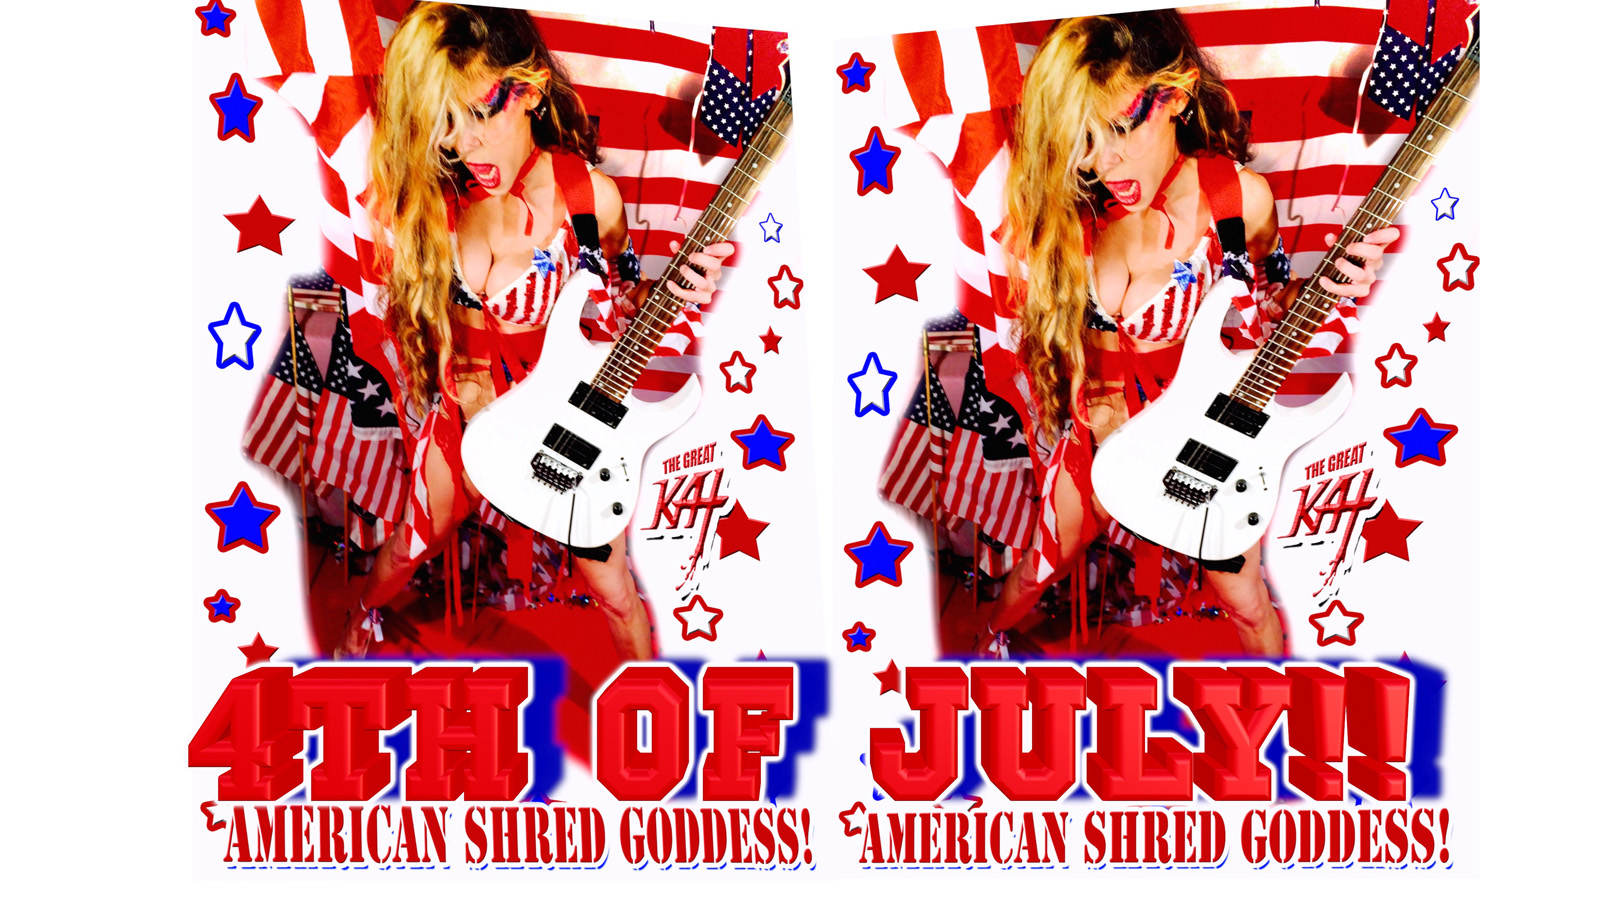 THE GREAT KAT'S "TOP 20 HOT SHRED HOLIDAYS!" "4th of JULY!!" From The Great Kat's NEW DVD!!!!